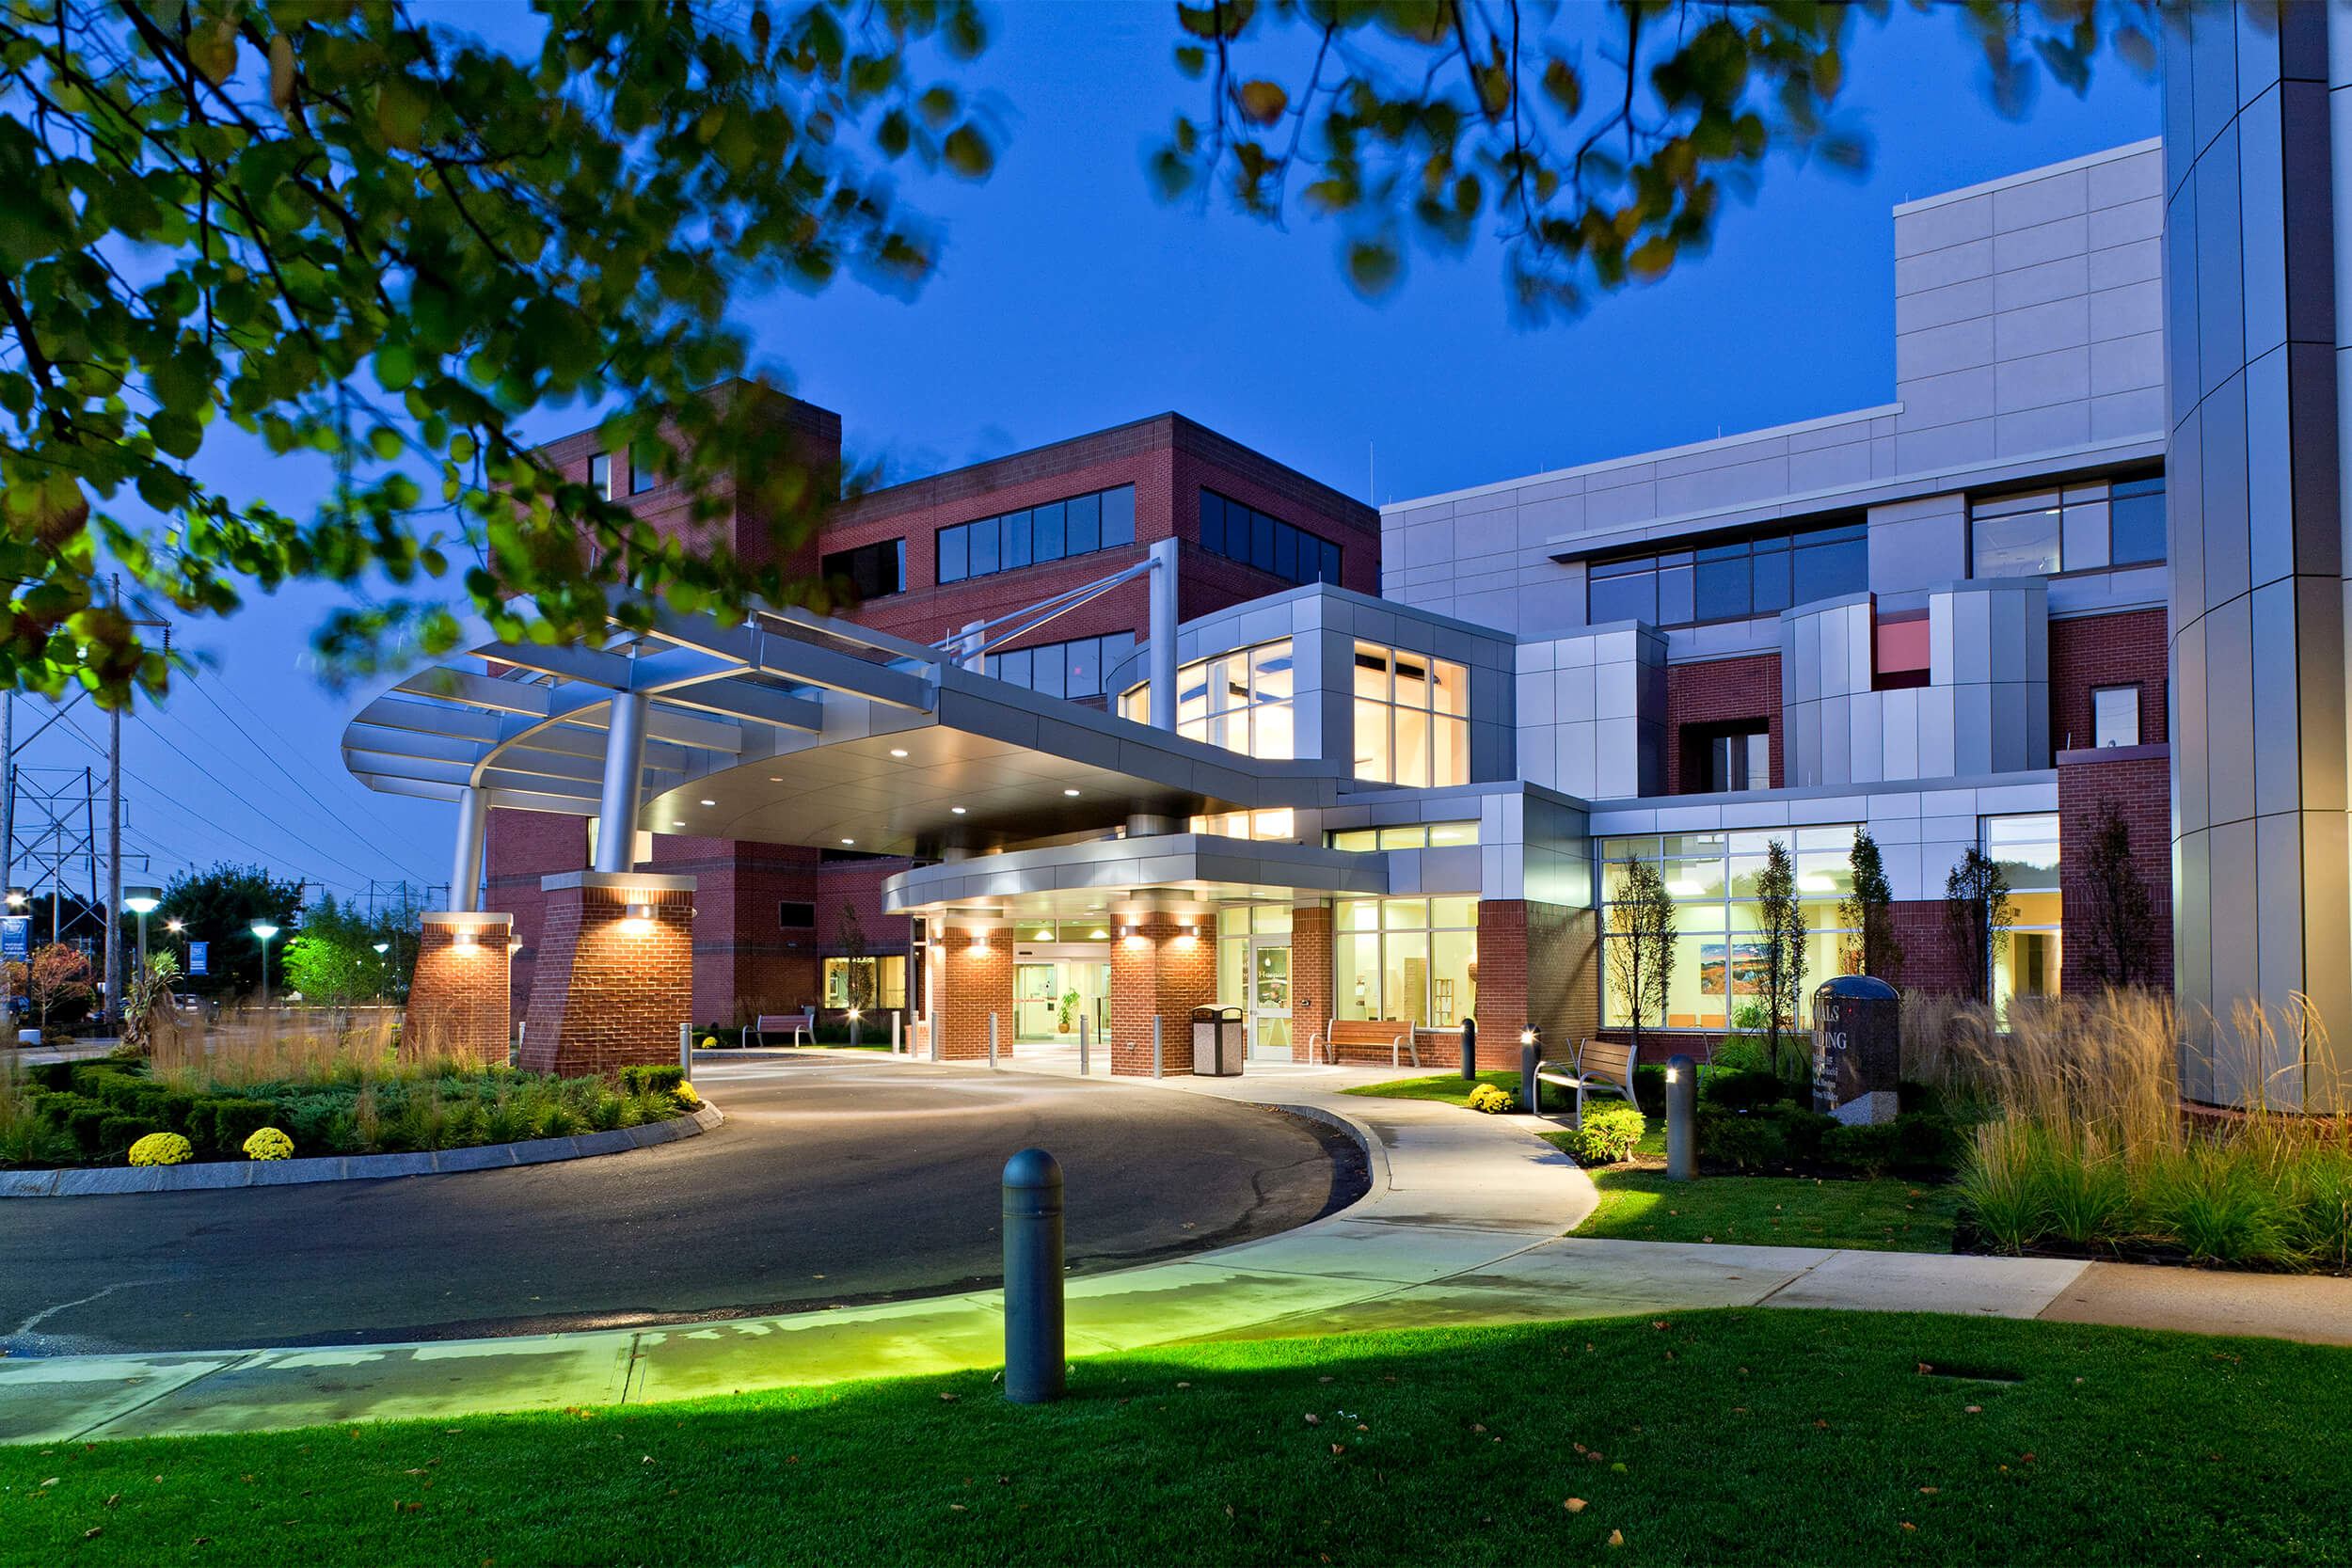 Exterior view of a hospital entrance. The photo is taken at dusk with low lighting - lights on the exterior and interior of the building illuminate it. The building features a mix of concrete and redbrick facade treatments, and a driveway curves around the entrance area.